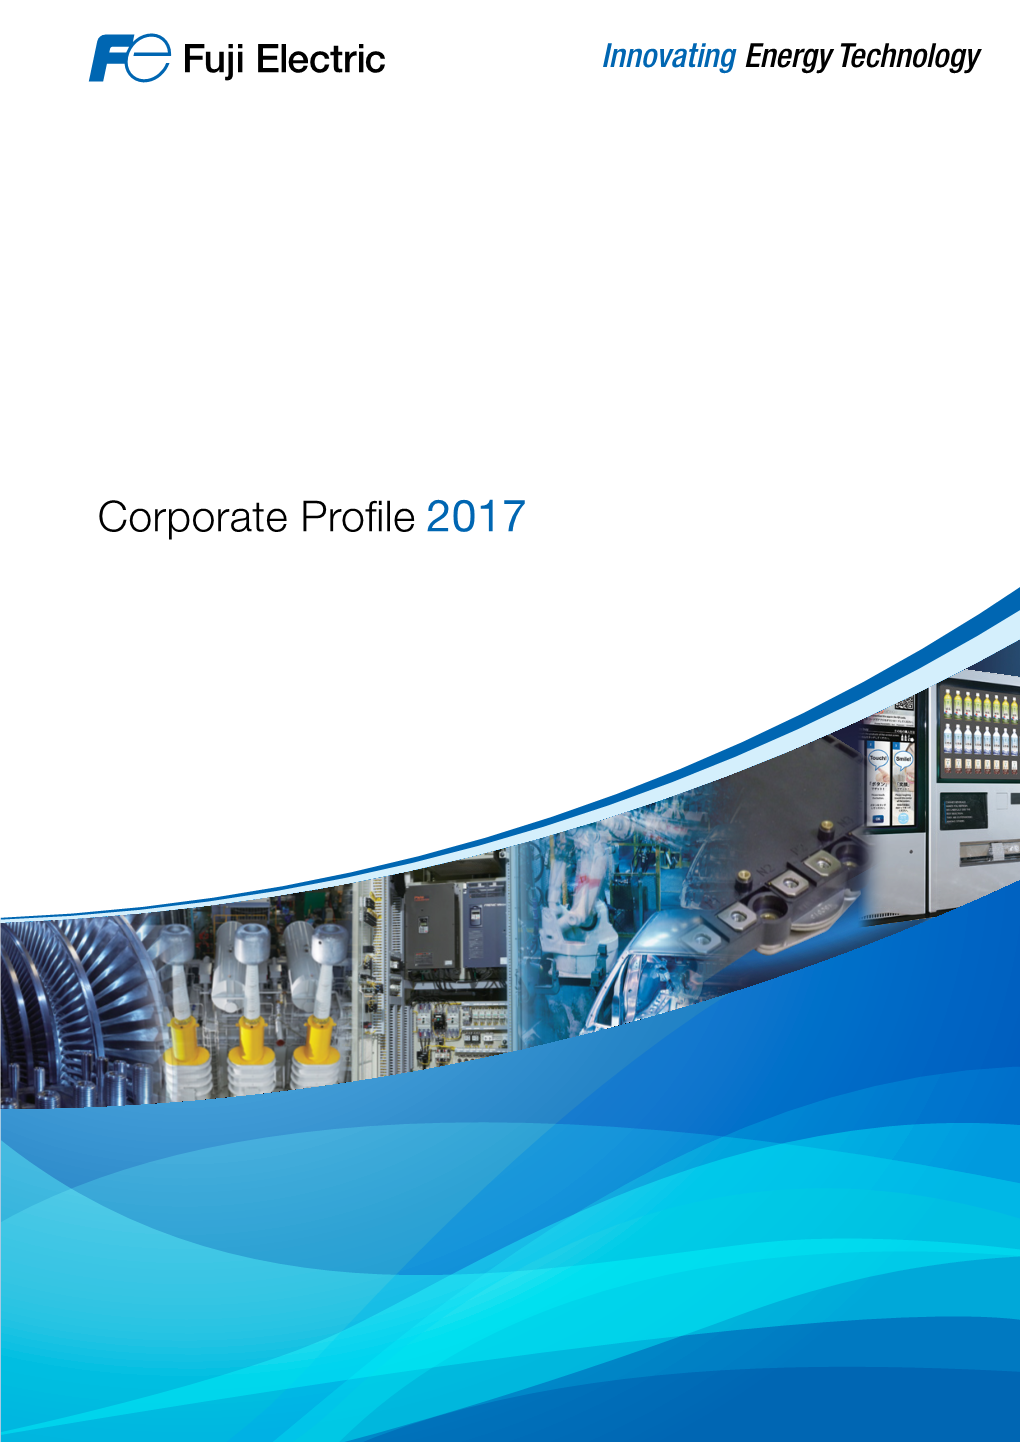 Corporate Profile 2017 Contributing to the Creation of Sustainable Societies Through Our Brand Statement Energy and Environment Businesses